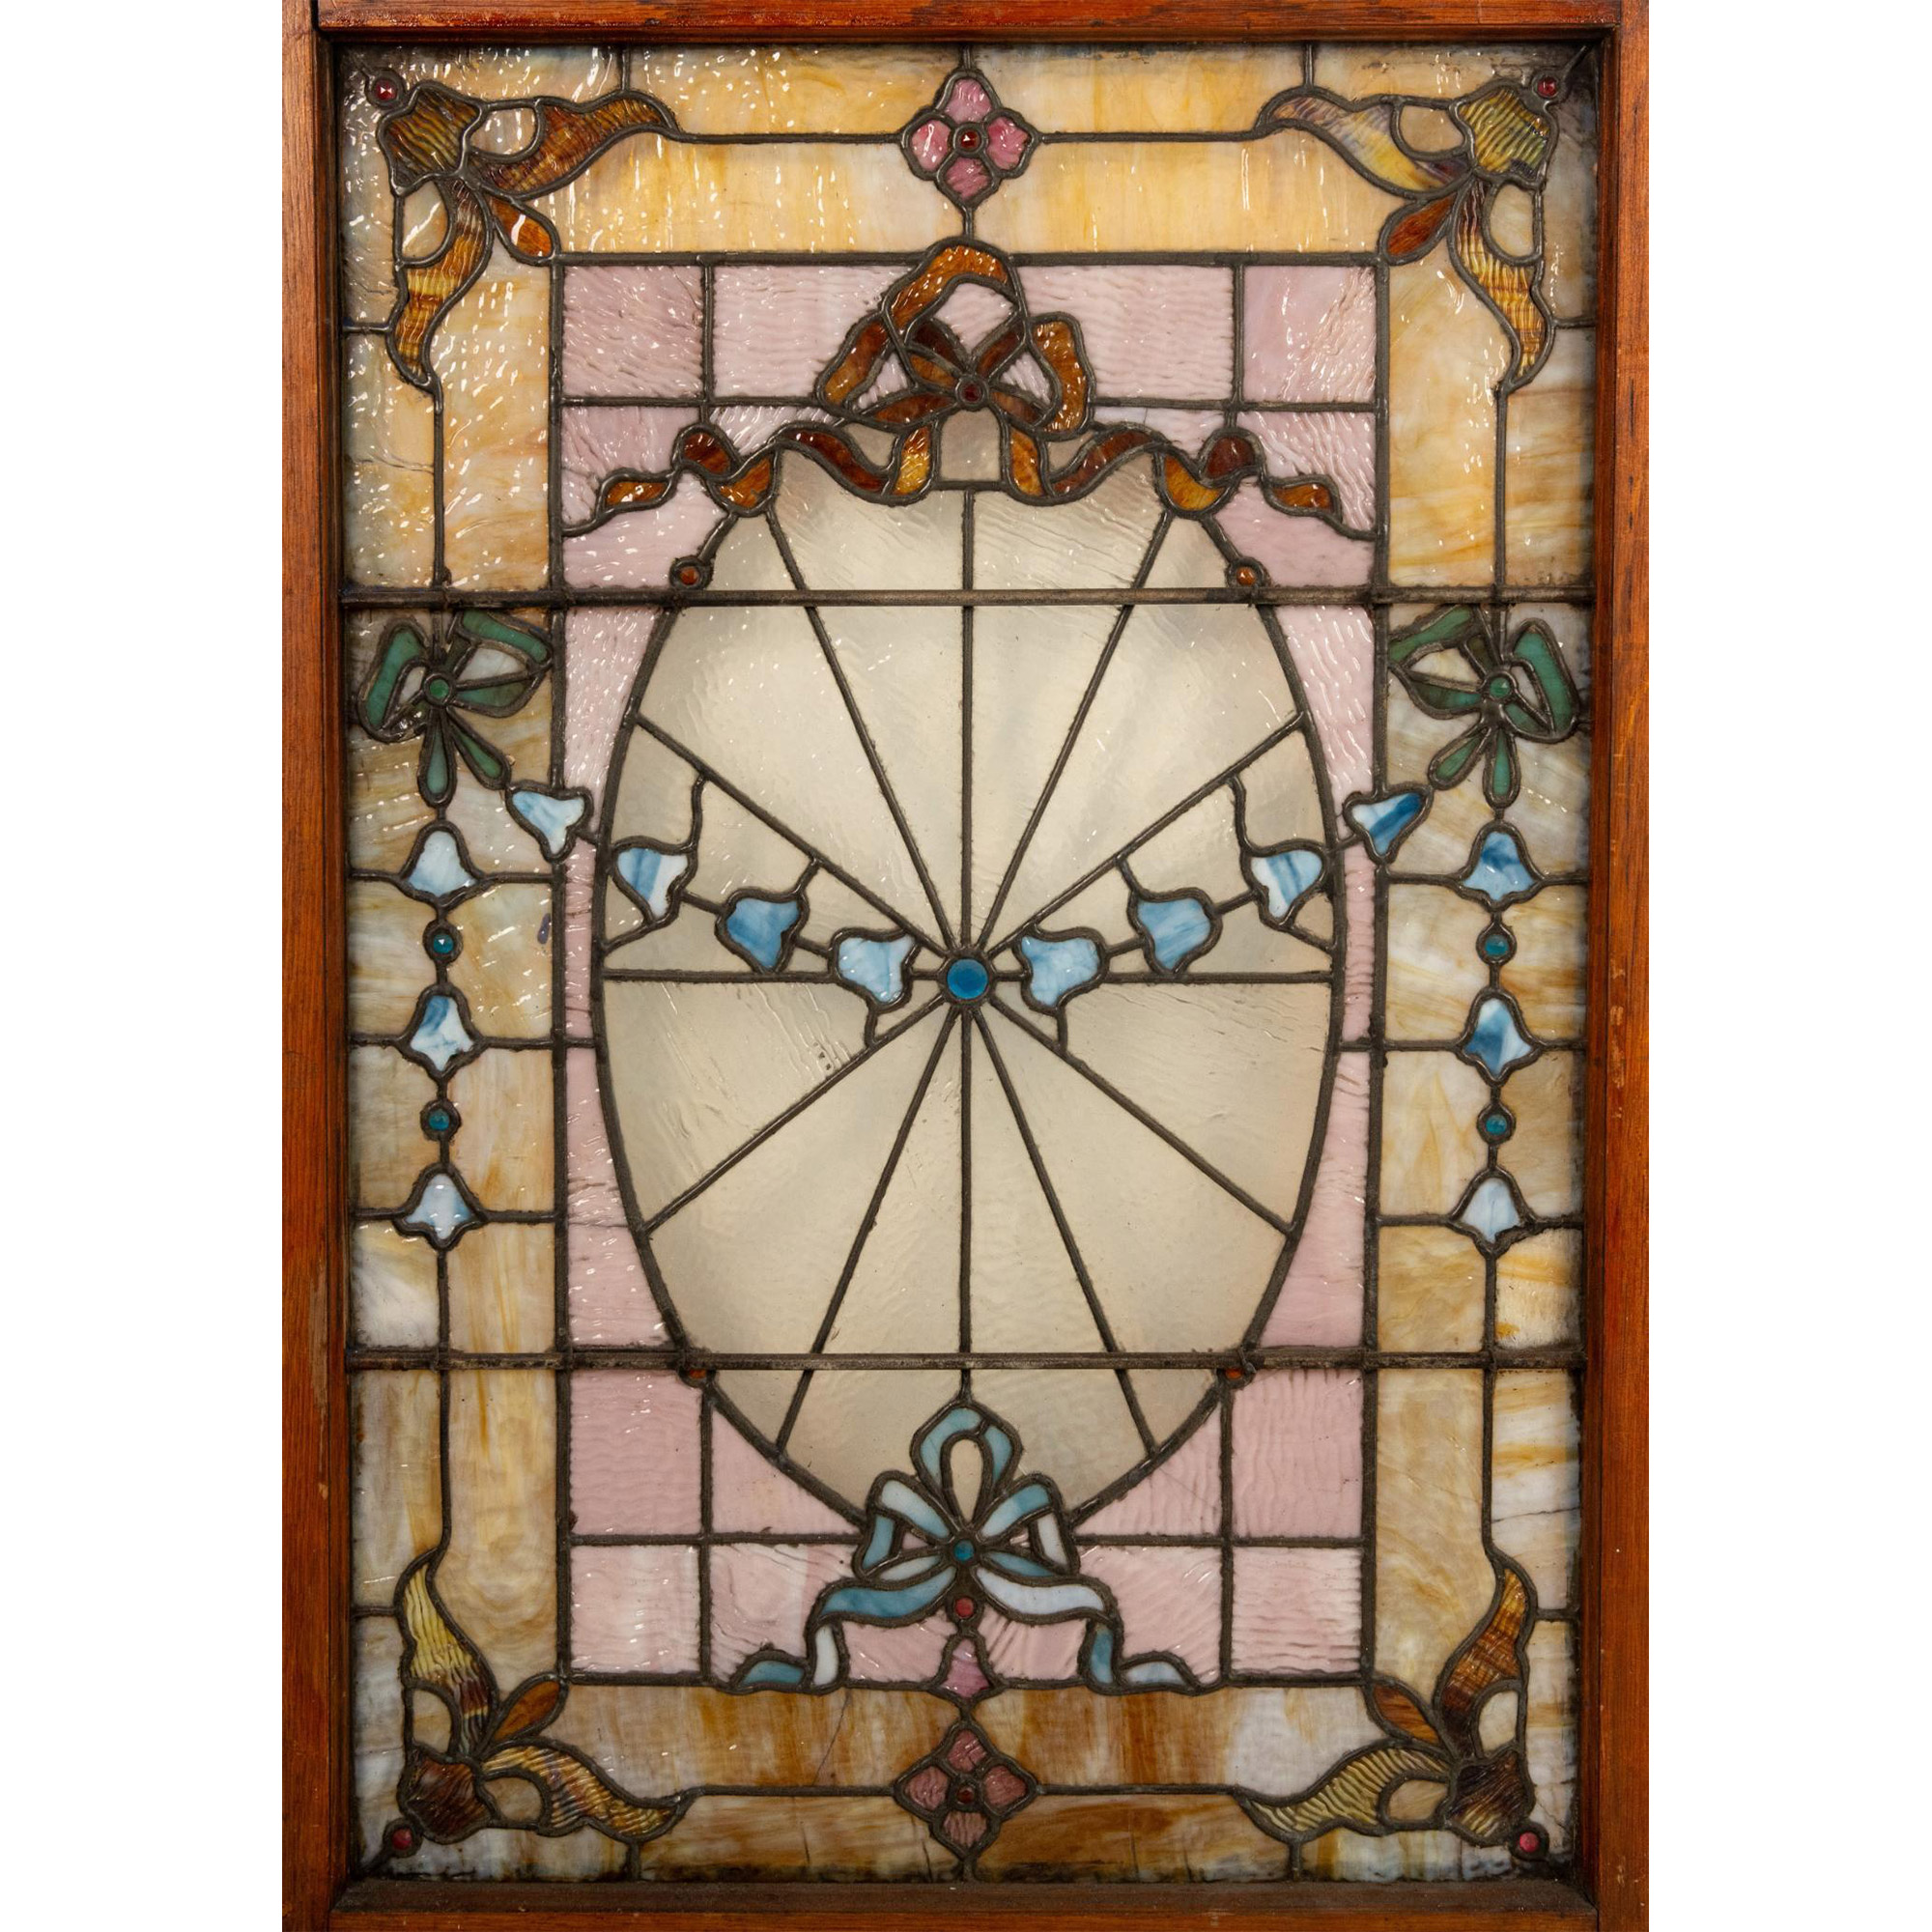 Antique Original Victorian Stained Glass Window Panel - Image 2 of 6